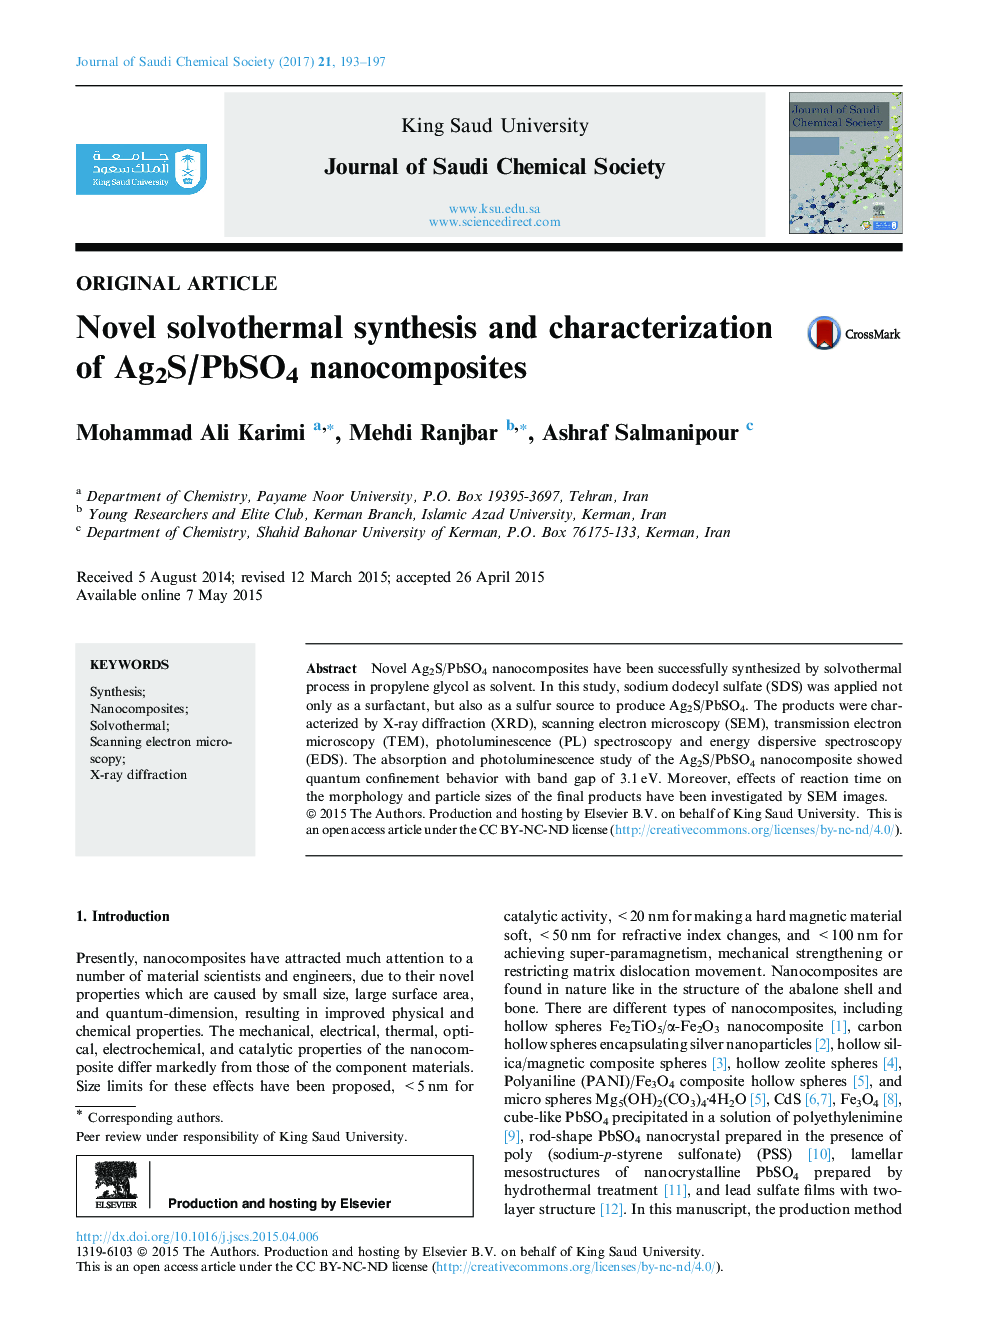 Novel solvothermal synthesis and characterization of Ag2S/PbSO4 nanocomposites